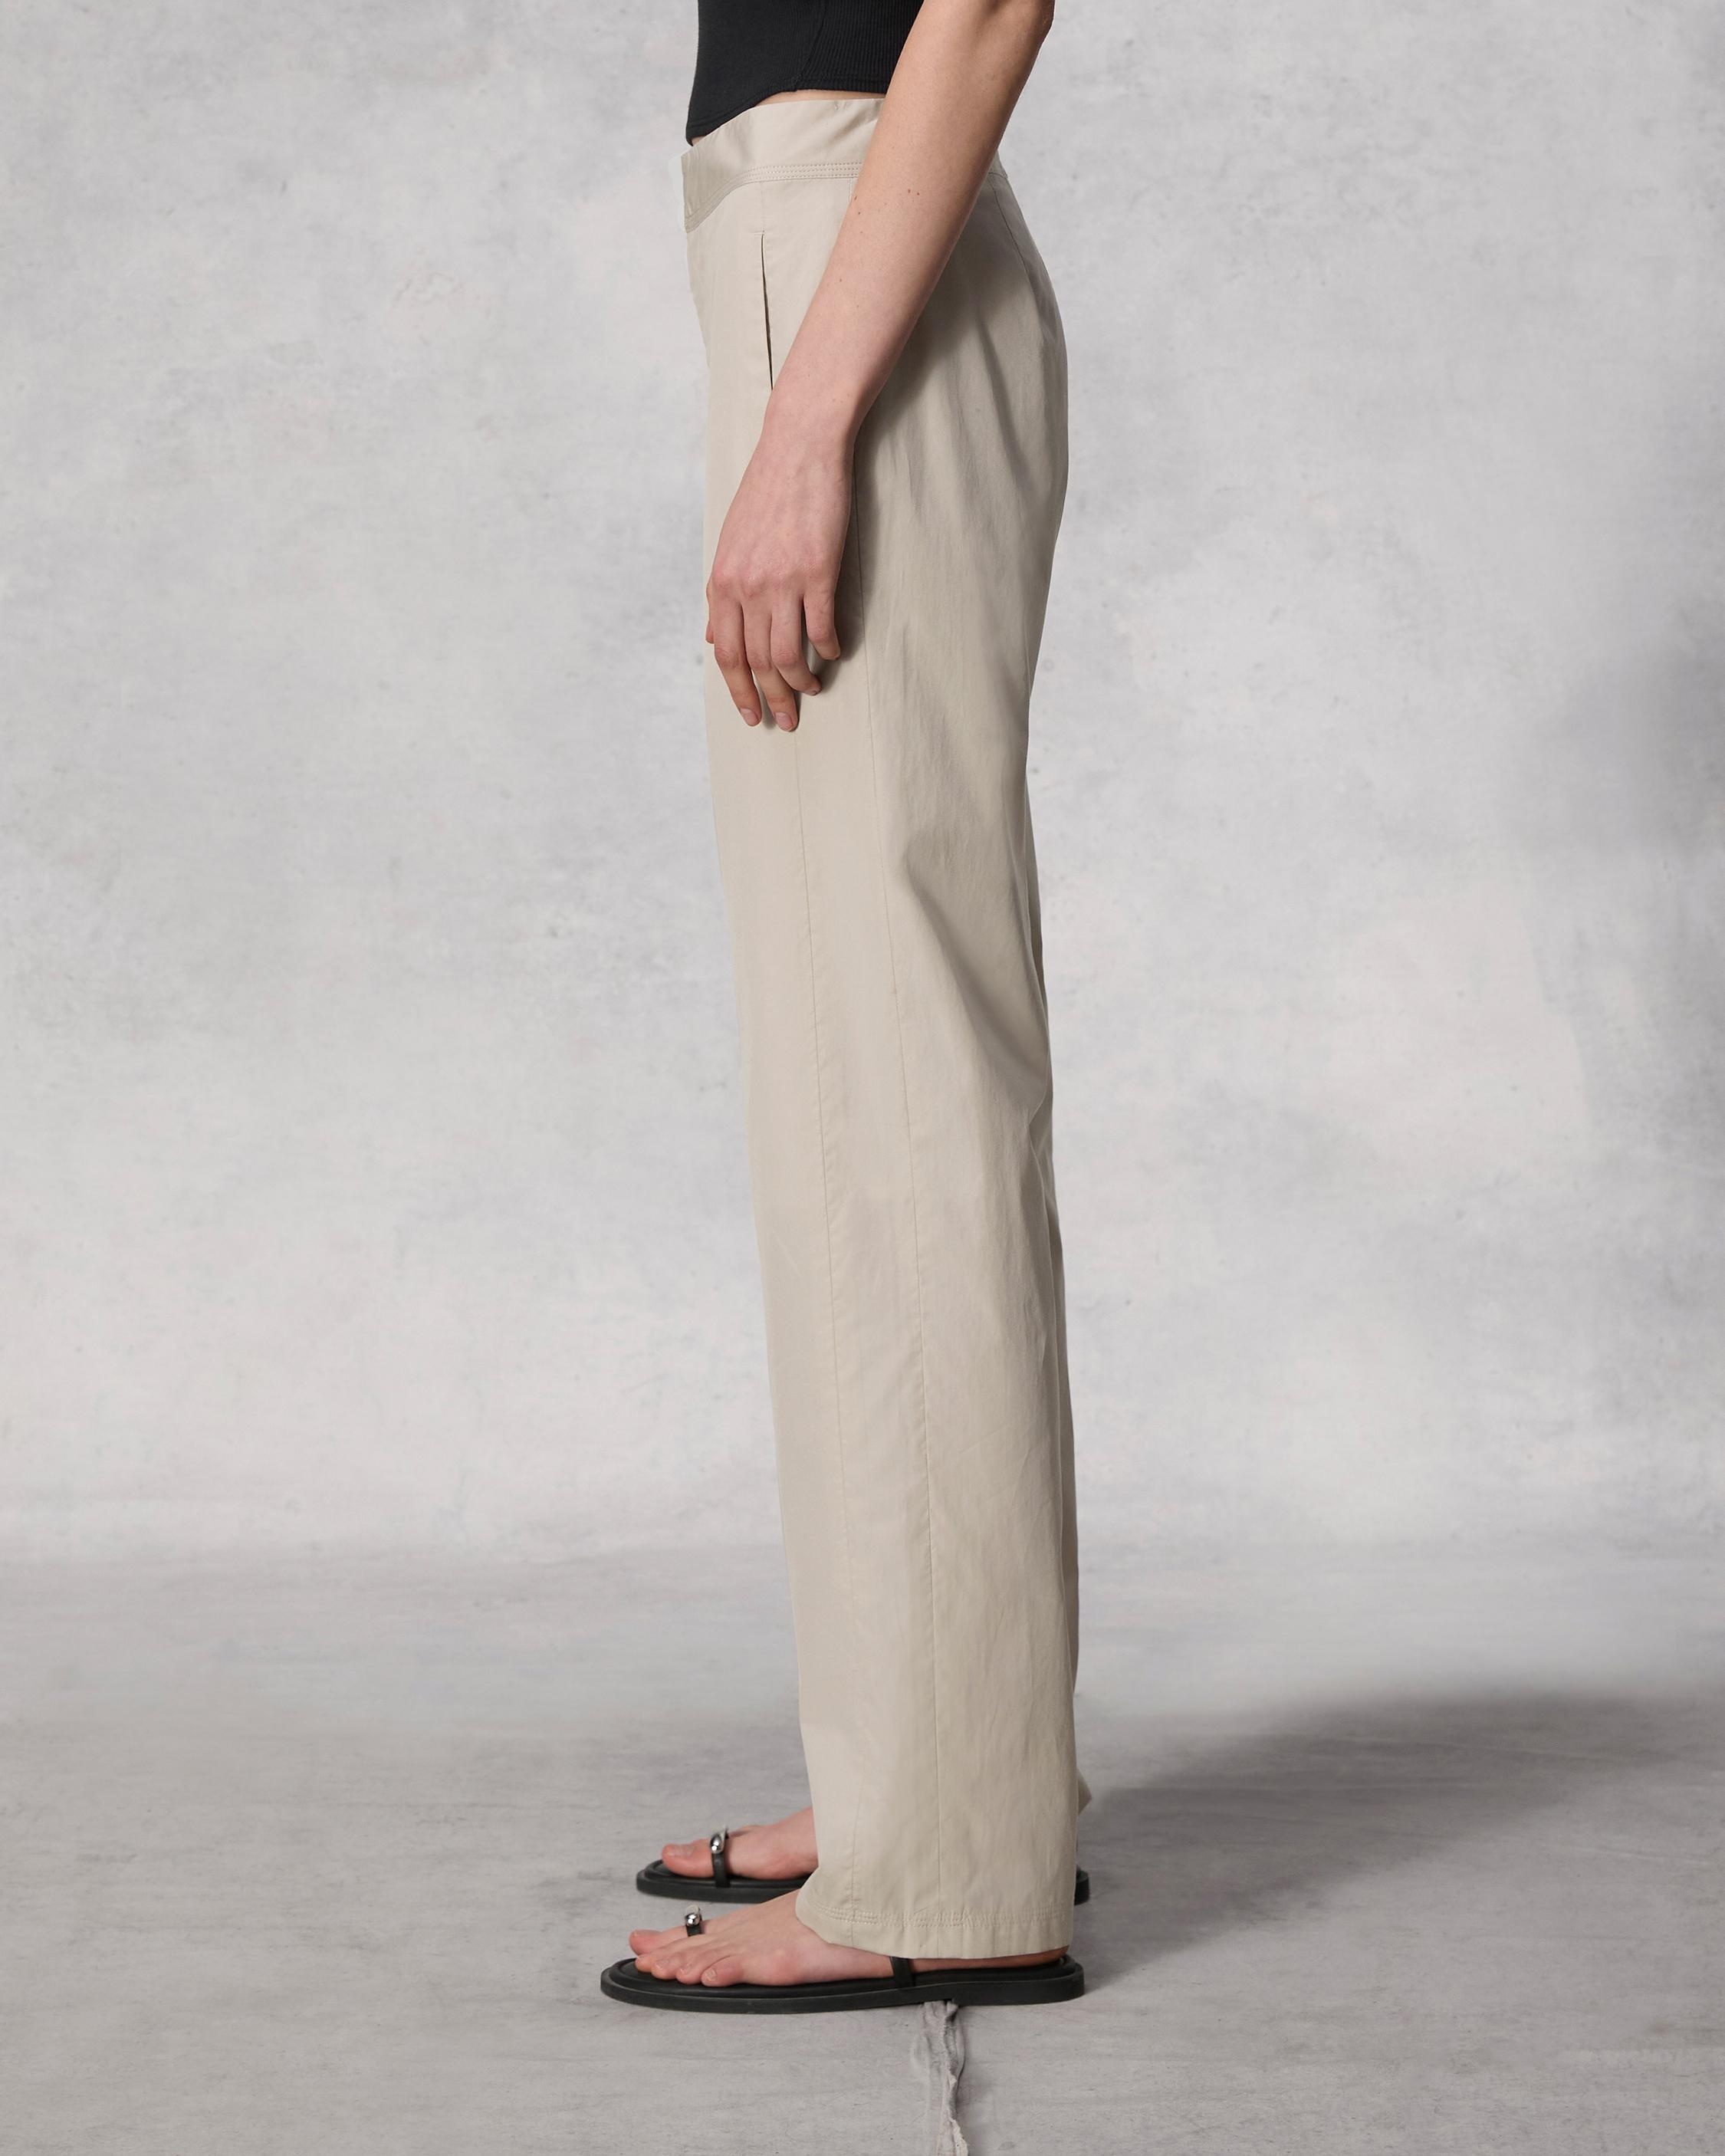 Fern Cotton Poplin Pant
Relaxed Fit - 3